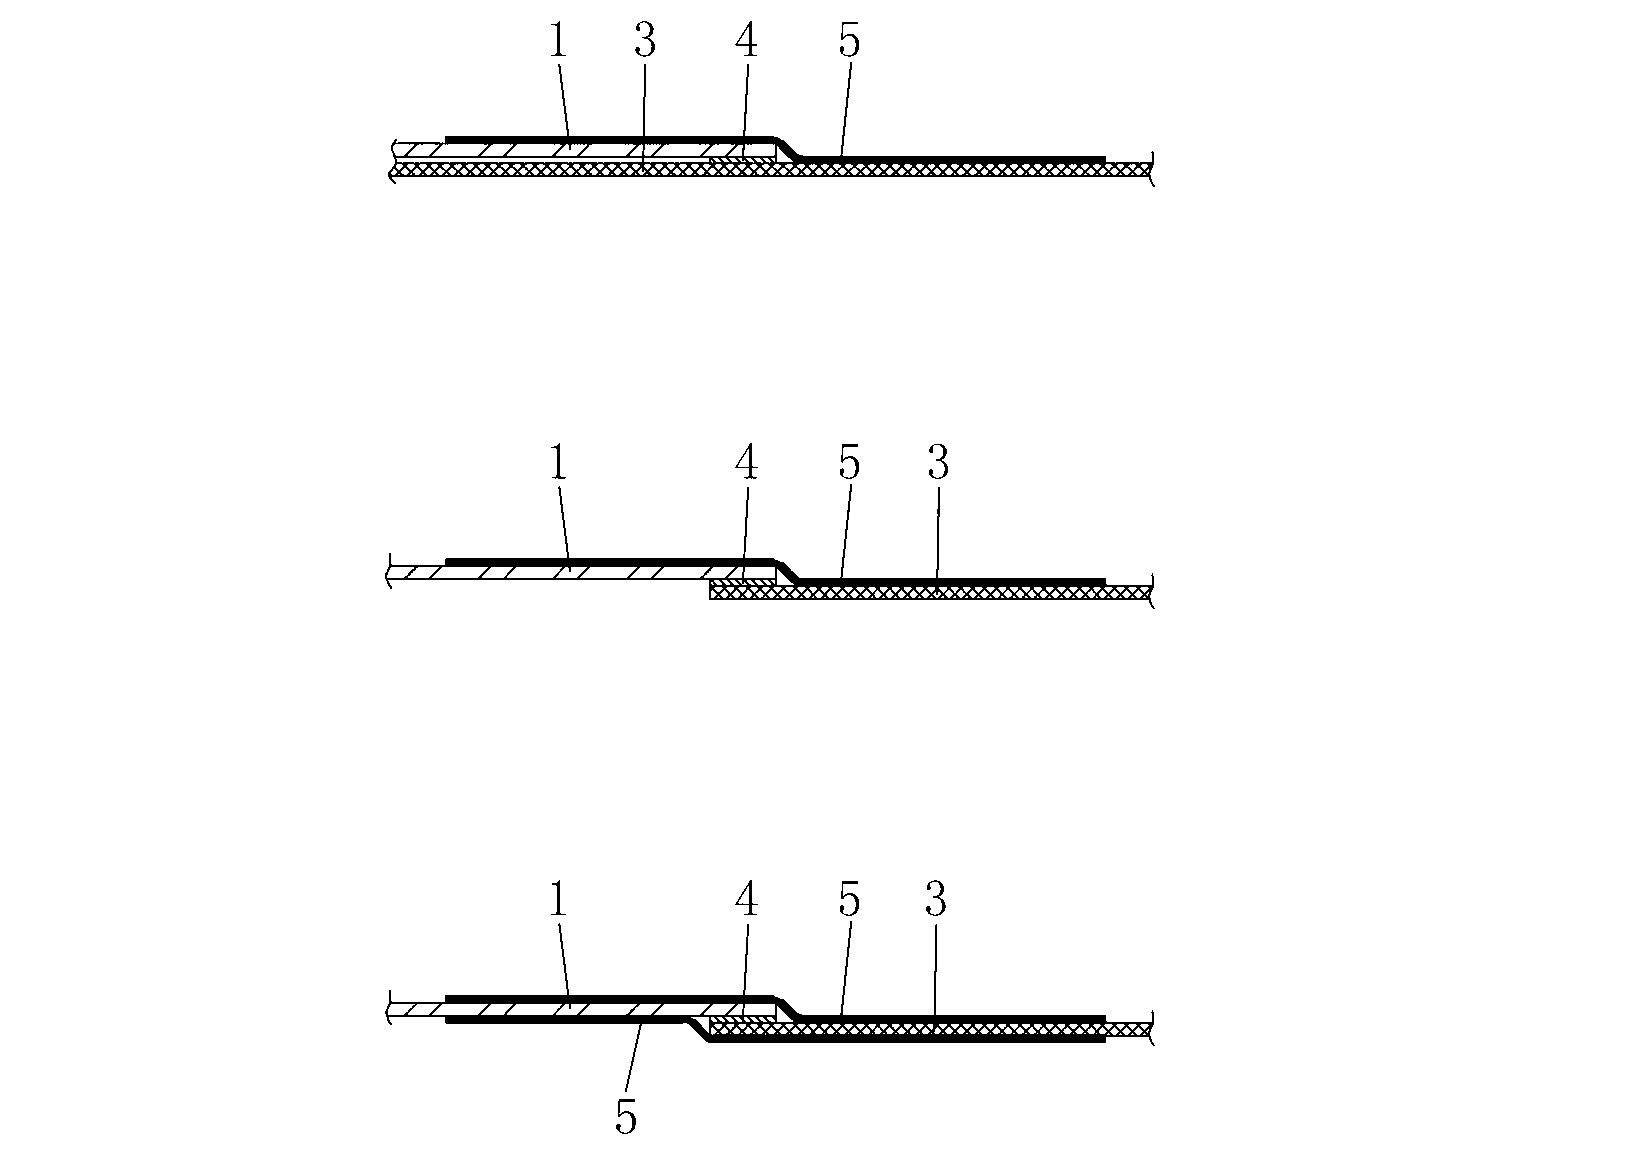 Producing method for simple SMT (surface mount technology) otter board